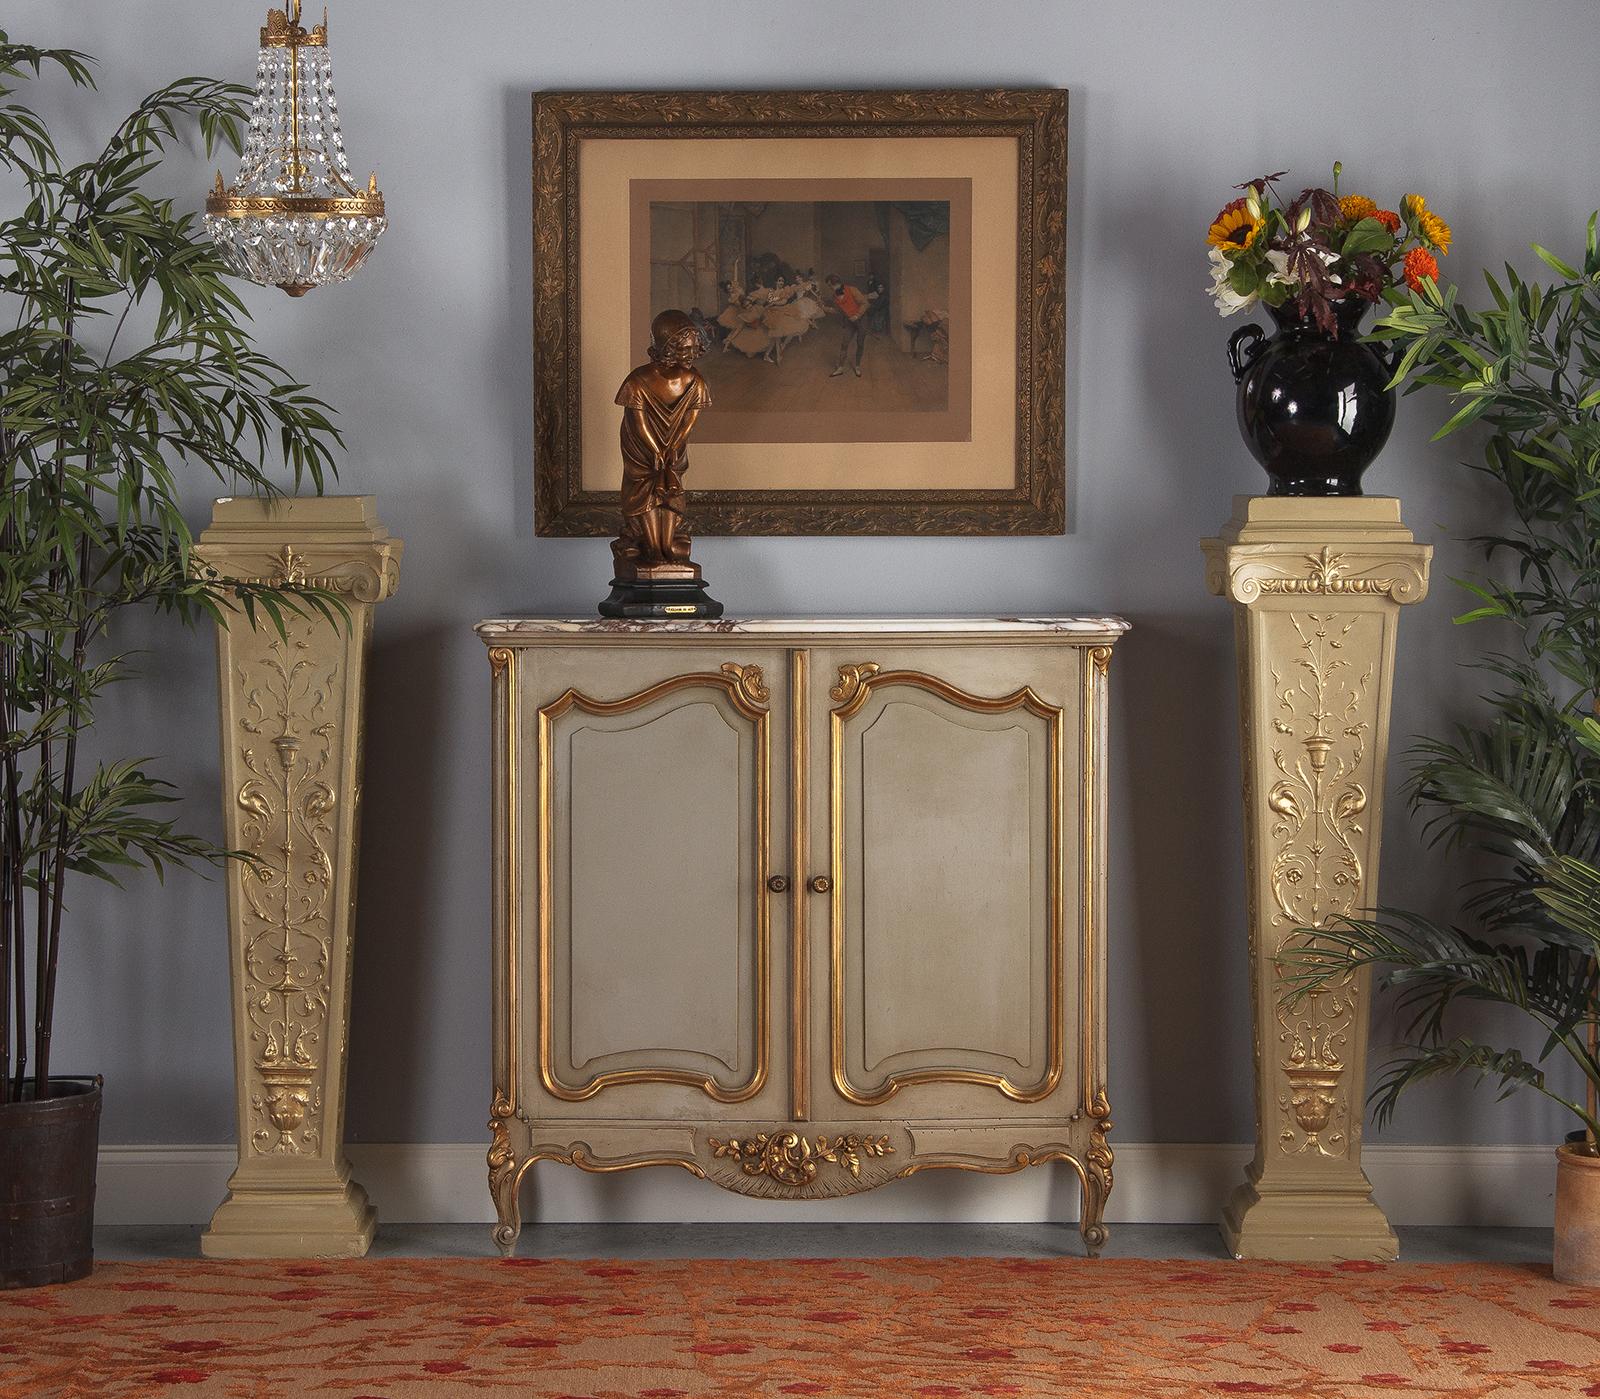 A very decorative pair of French pedestals made of painted and gilded plaster, circa 1940s. The style mixes neoclassical, Second Empire and Louis XVI. The pedestals are painted in yellow-green tones with gilded motifs of urns, arabesques and birds.